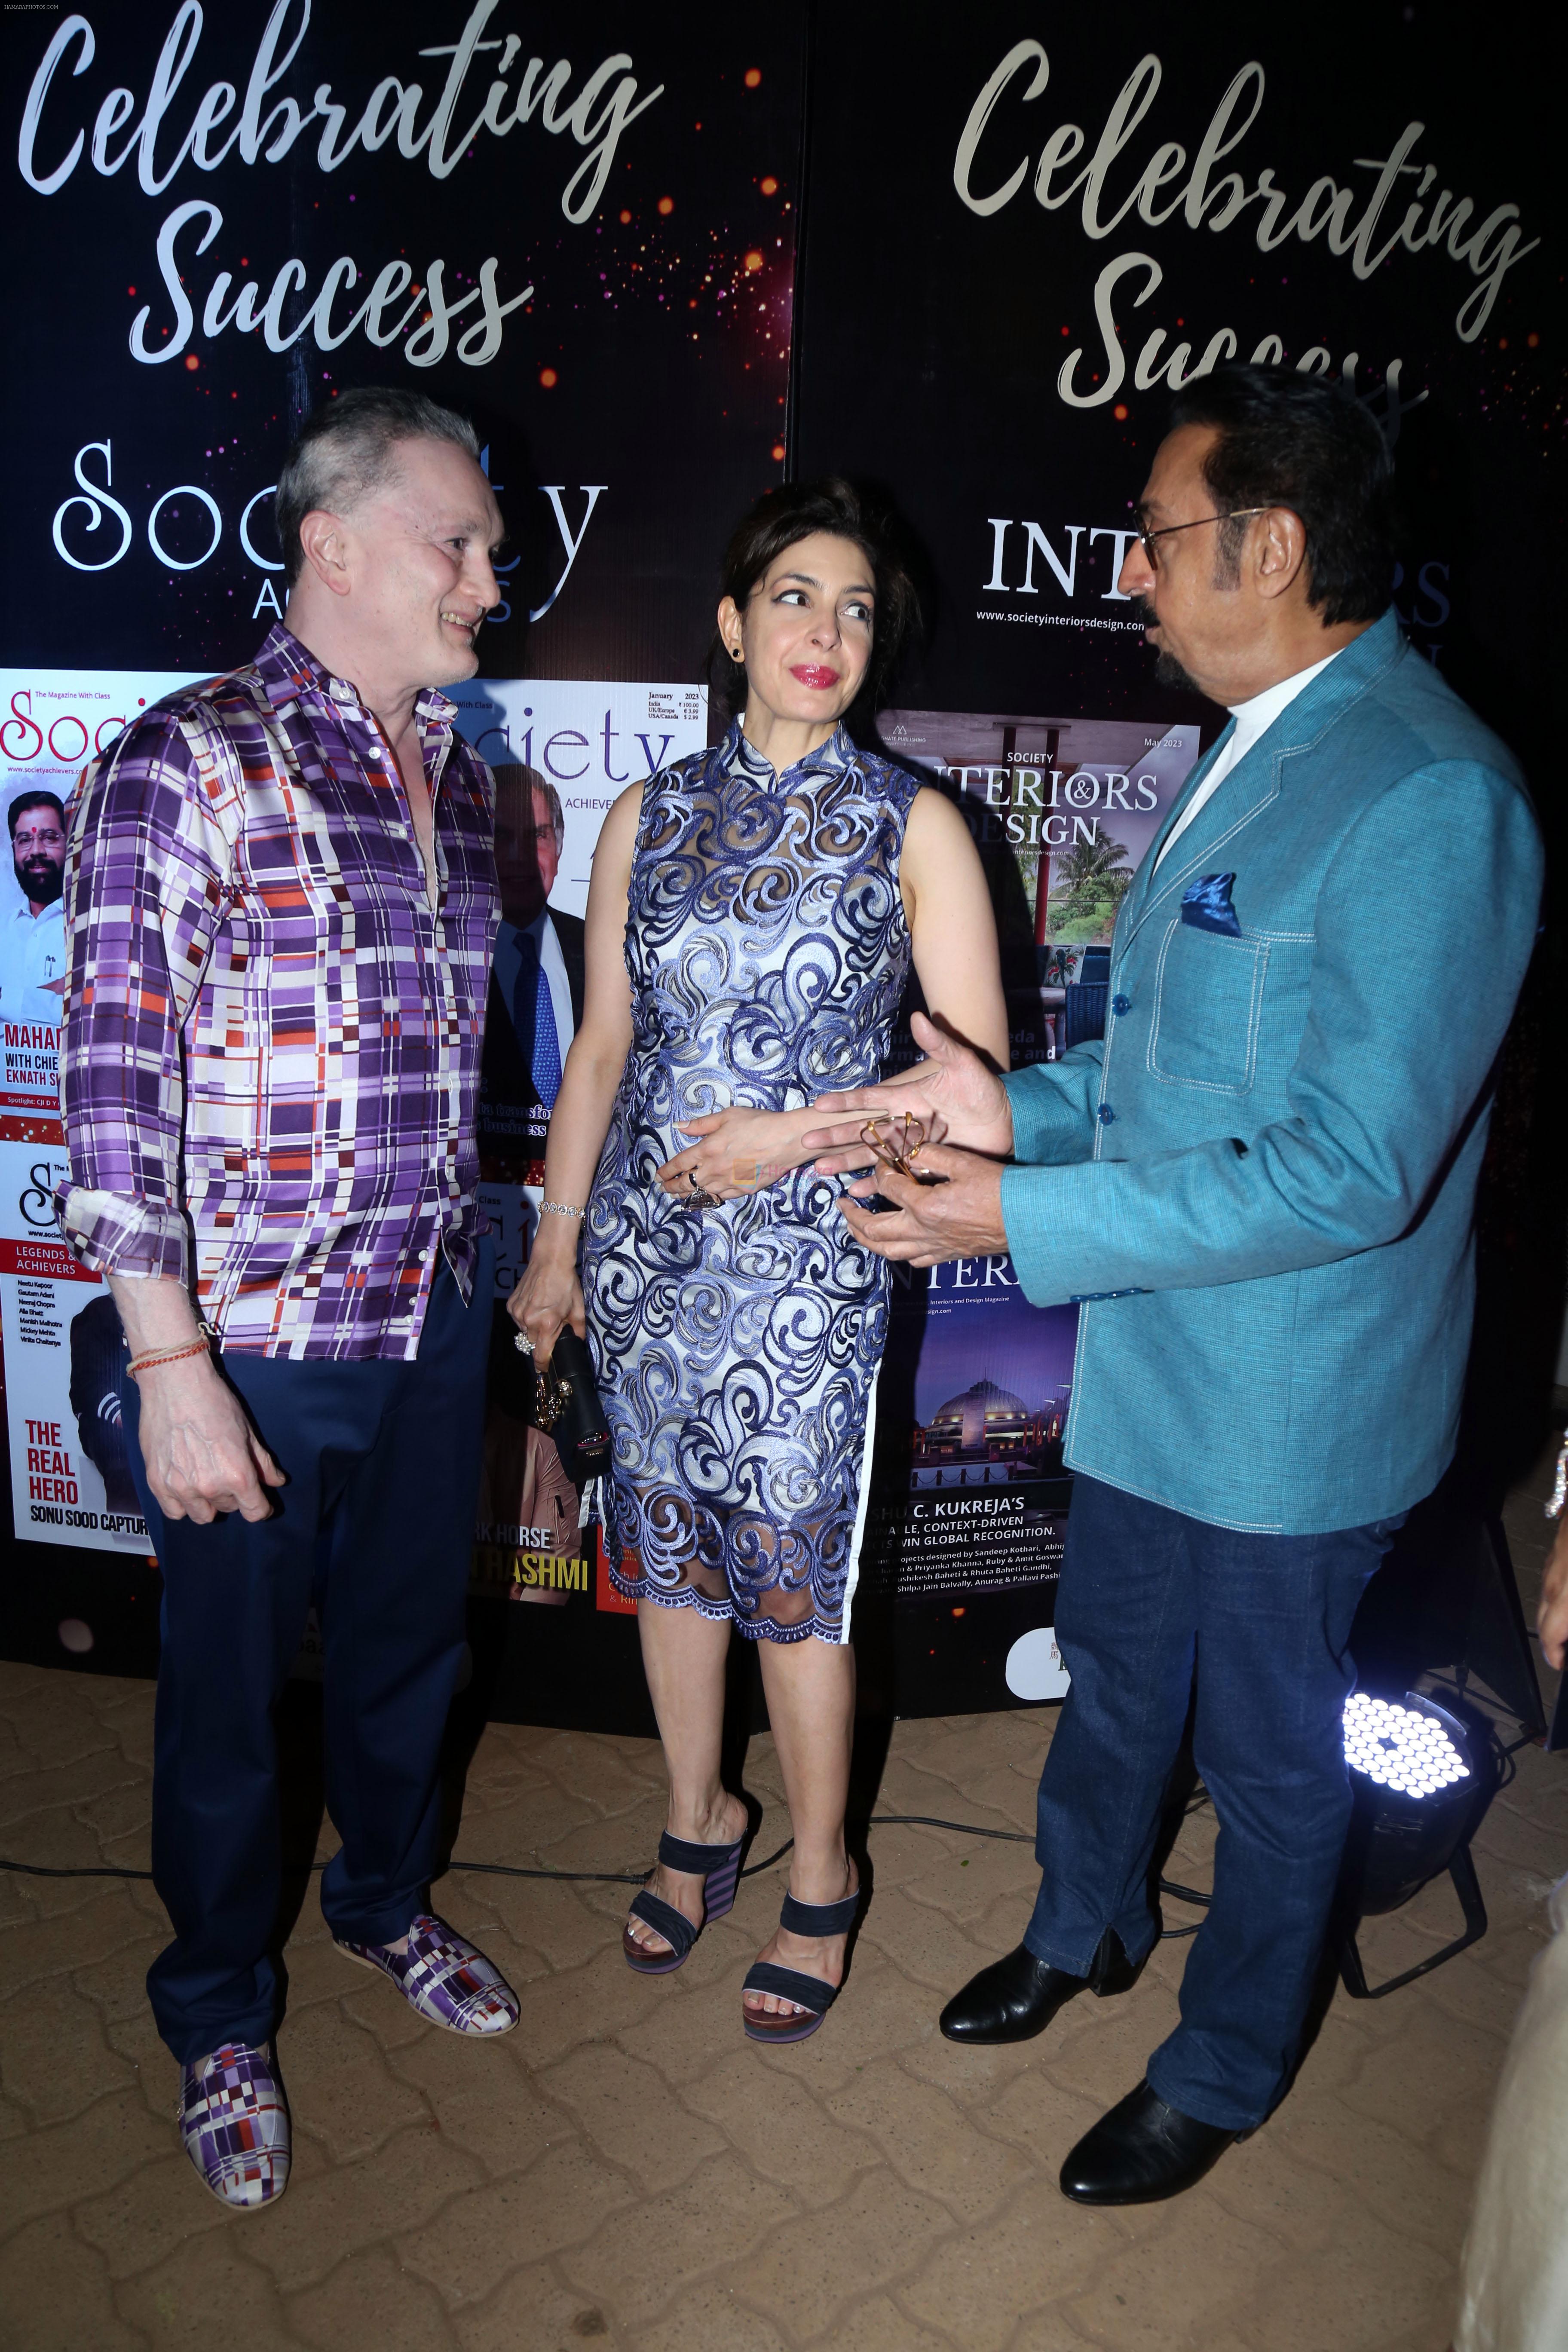 Gautam Singhania with wife Nawaz Modi Singhania and Gulshan Grover at the ReOpening of Keibaa X All Saints and Celebration of Society Achievers and Society Interiors and Design Magazine